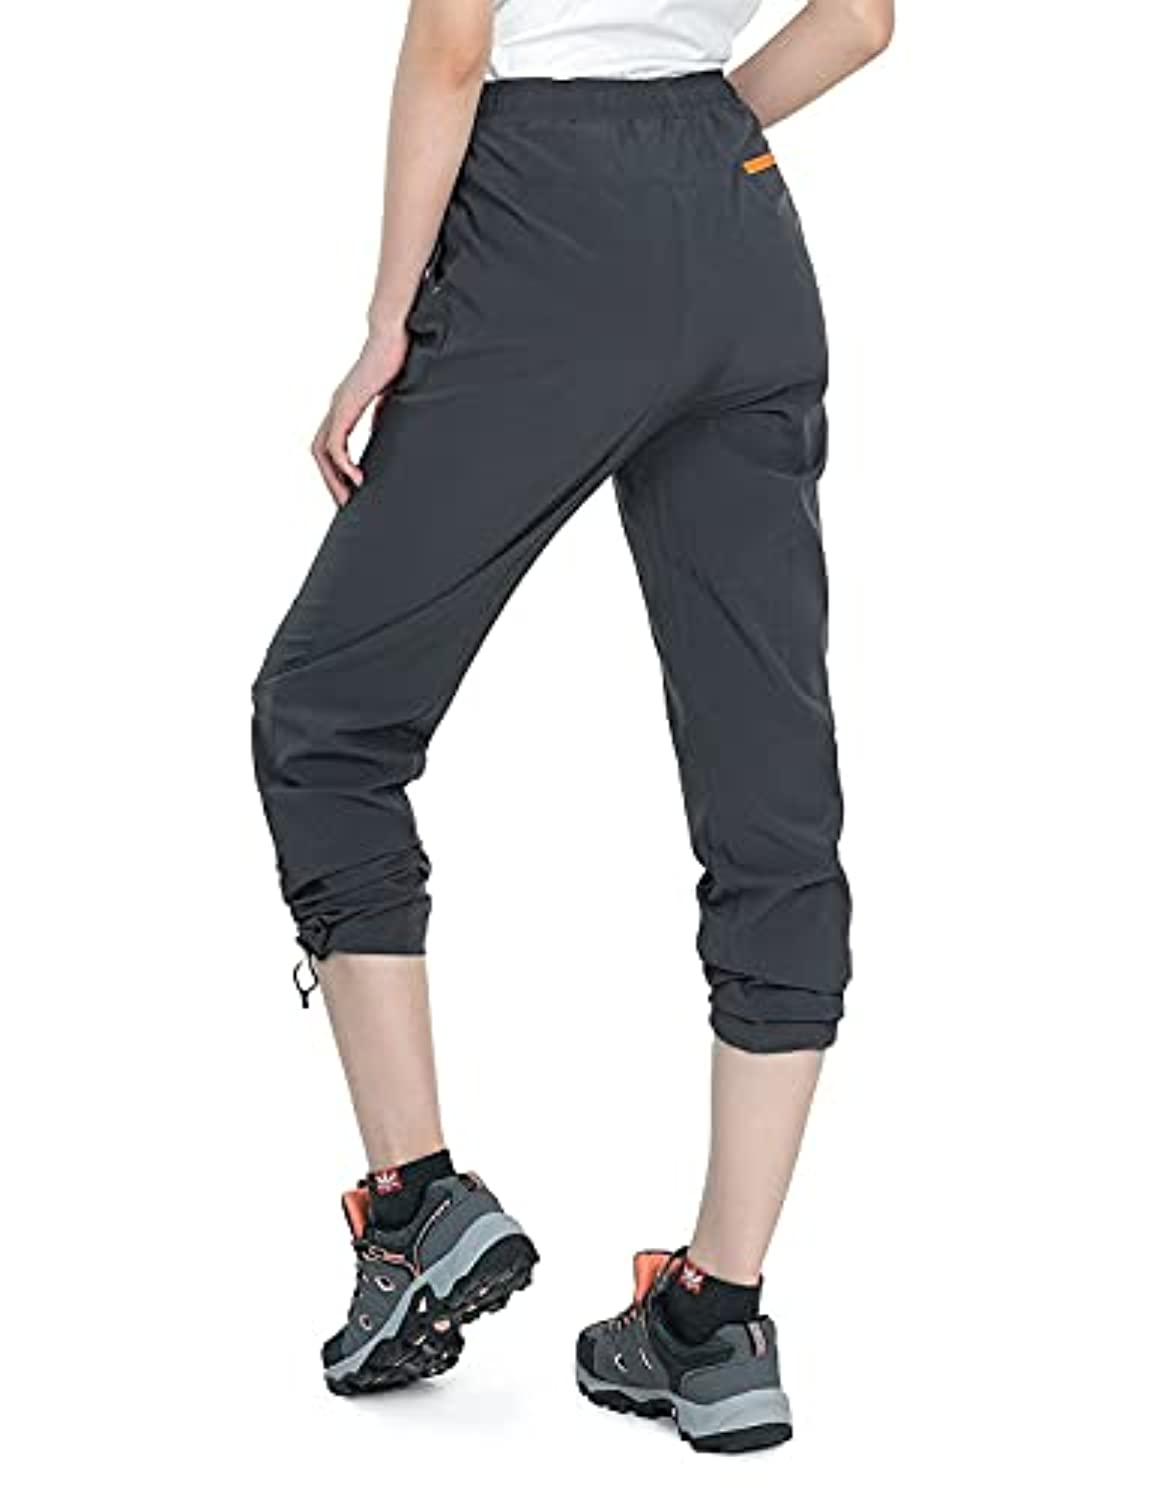 Women's Hiking Pants Lightweight Quick Dry Joggers Pants from Bangladesh